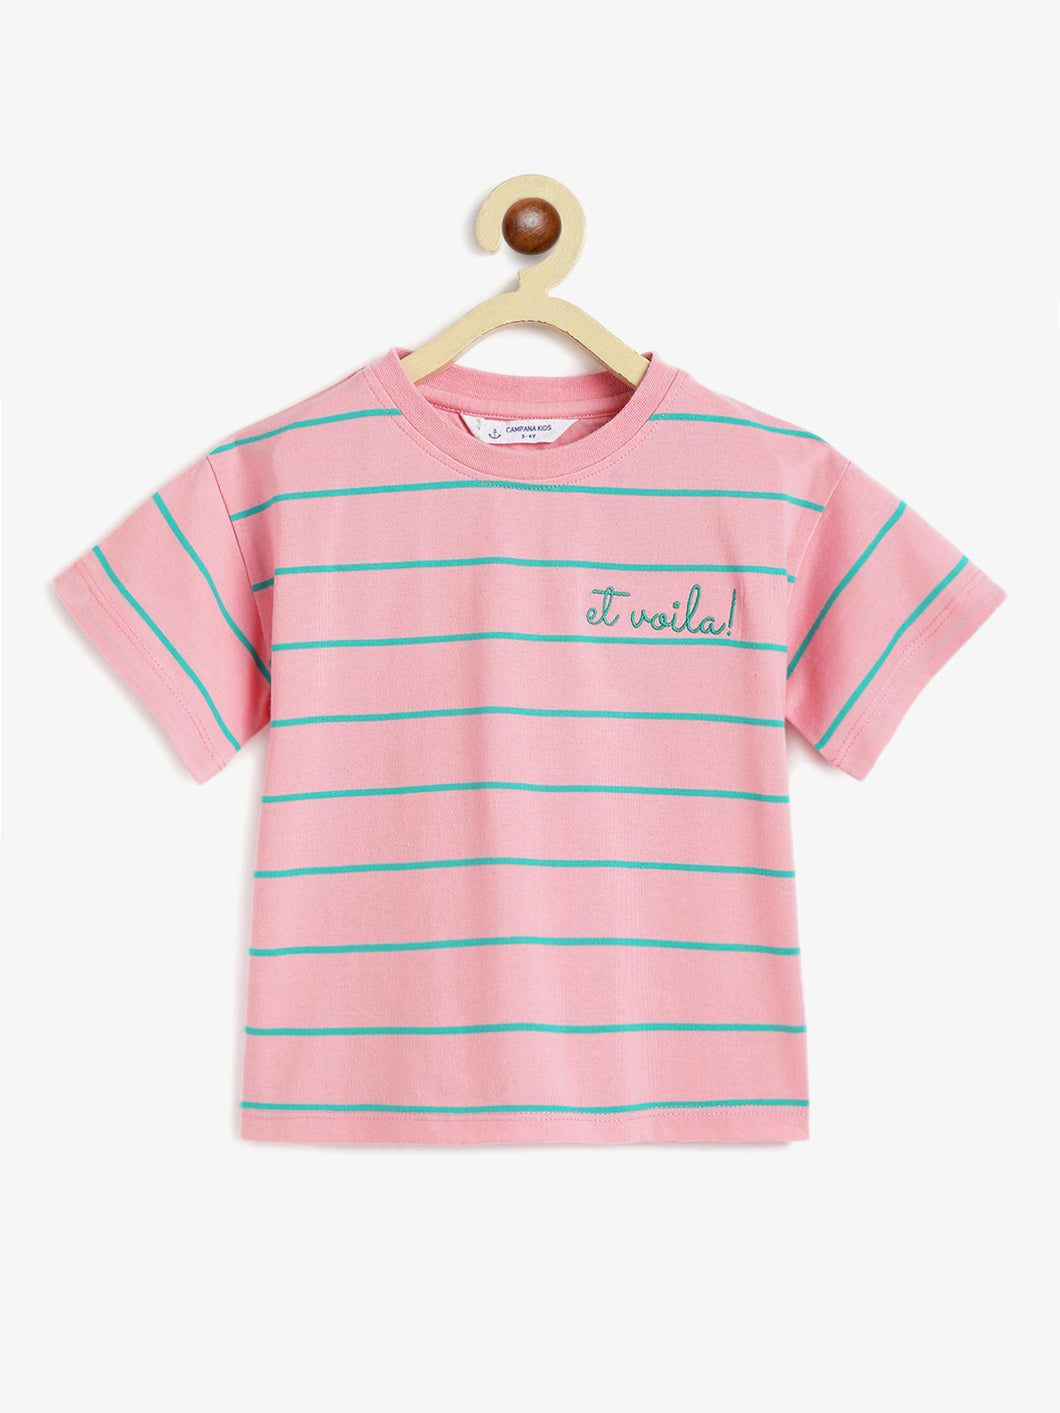 Campana Girls Alexis Half Sleeves Striped Drop Shoulder T-shirt with Embroidery - Pink & Green